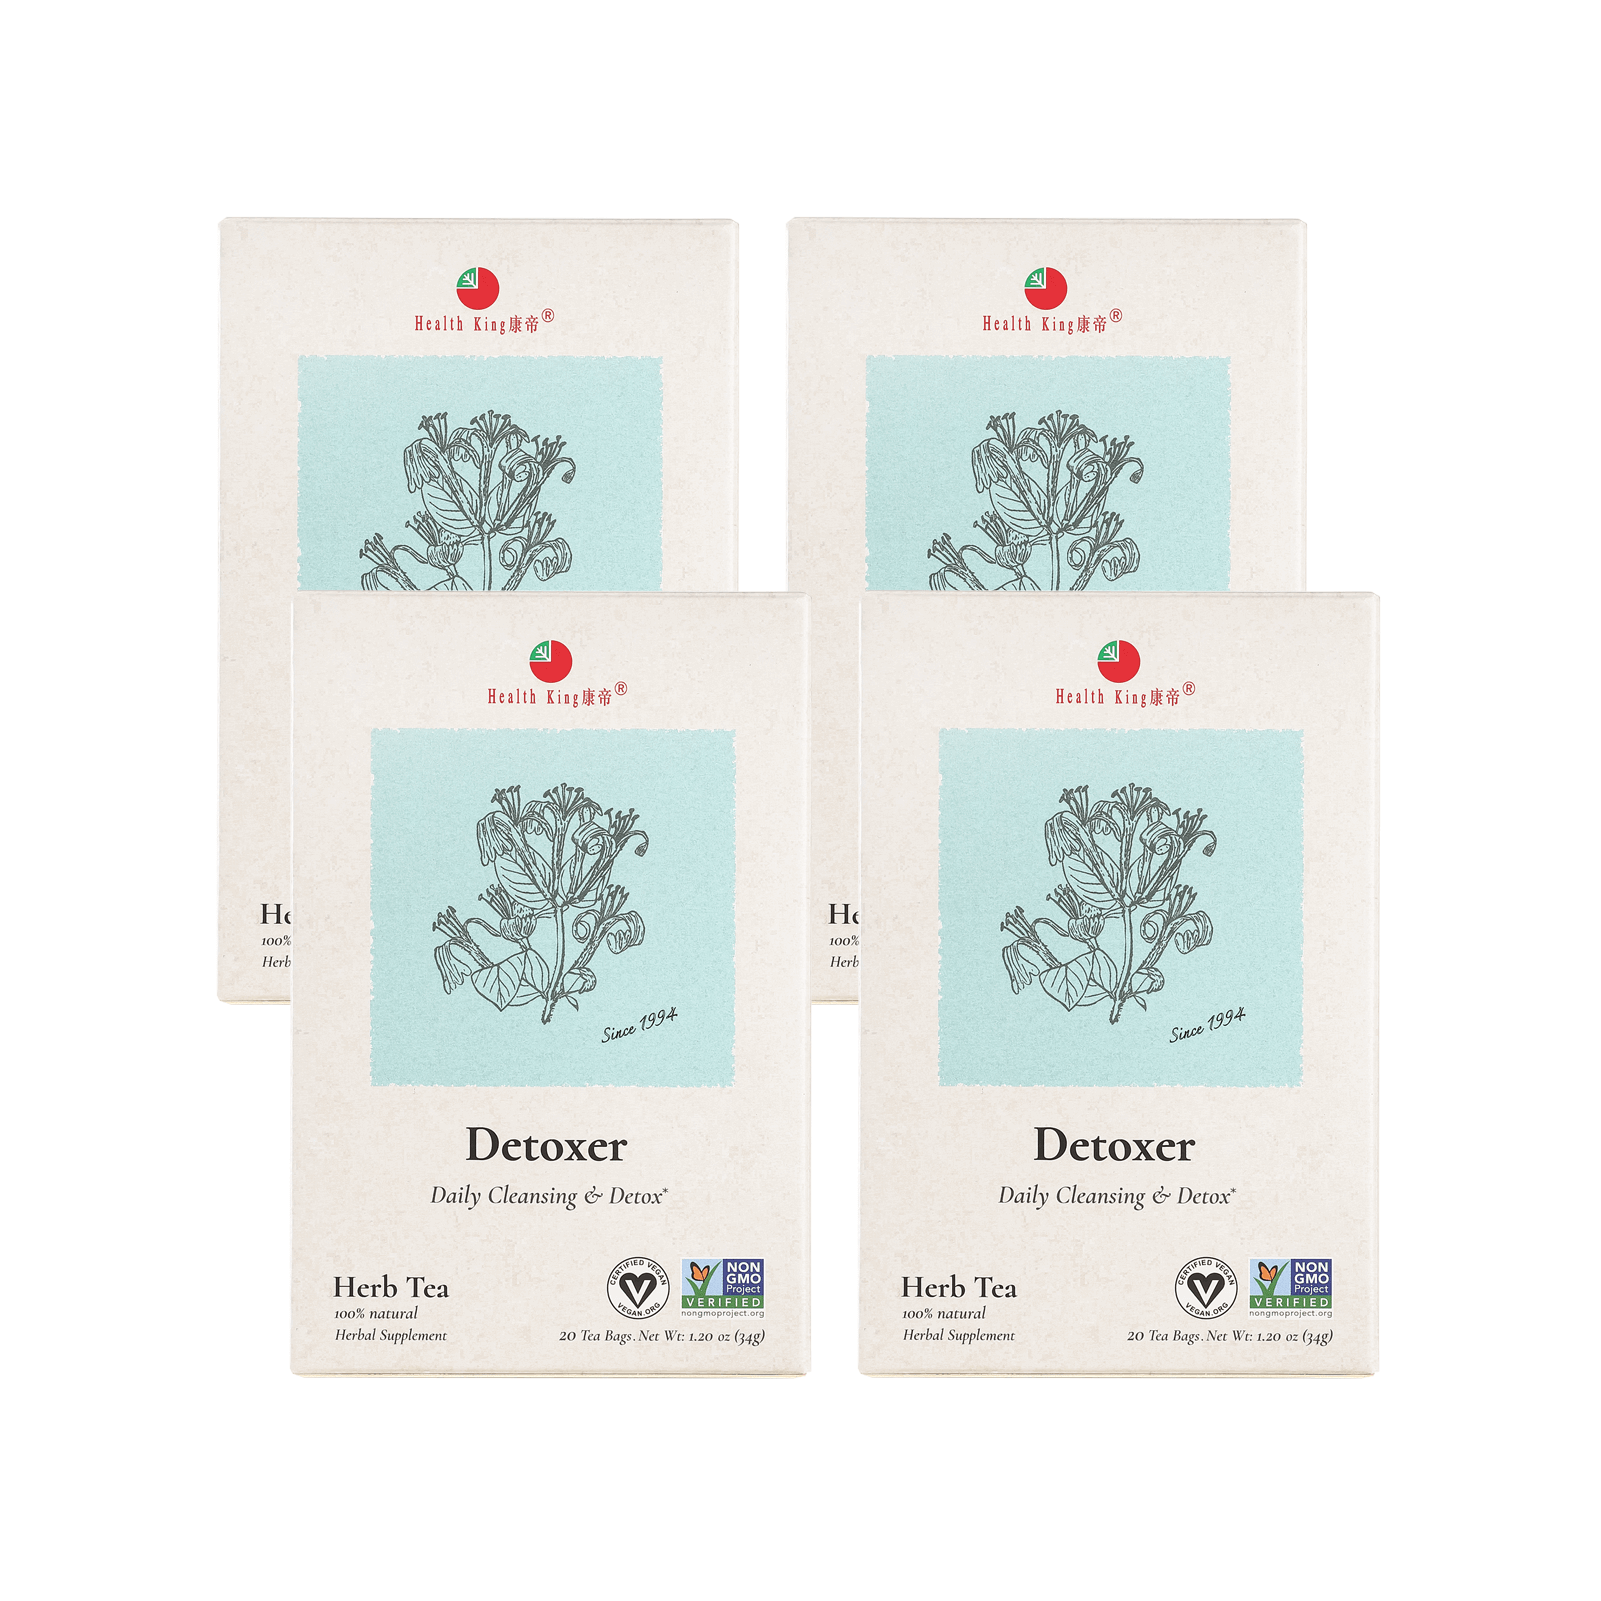 Detoxer Herb Tea packages with branding visible